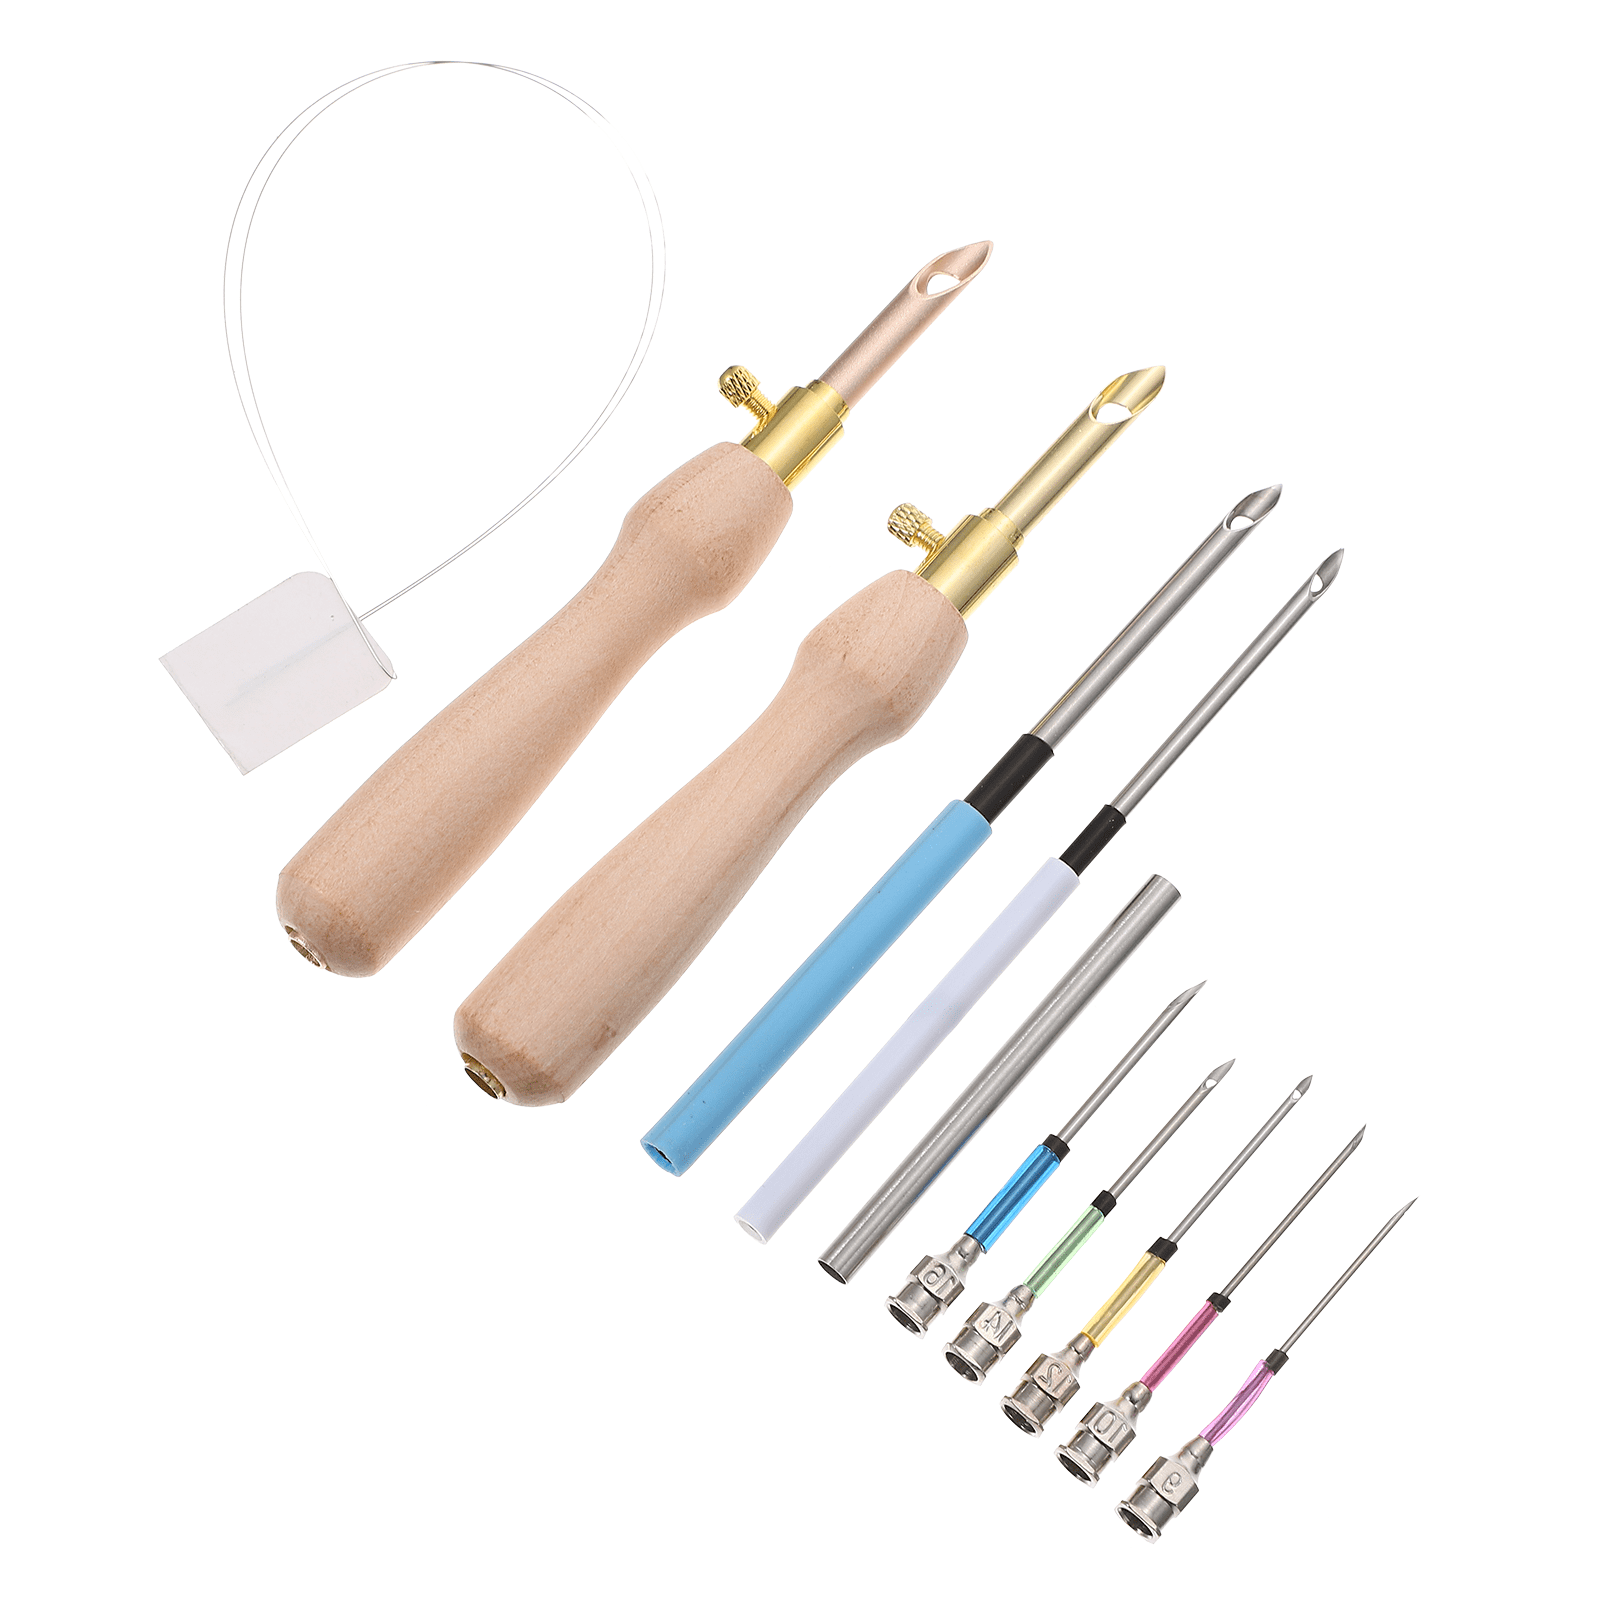 1 Set Embroidery Stitching Punch Needle Wooden Handle Embroidery Punch Needles, Size: 1.5X1.5X11CM